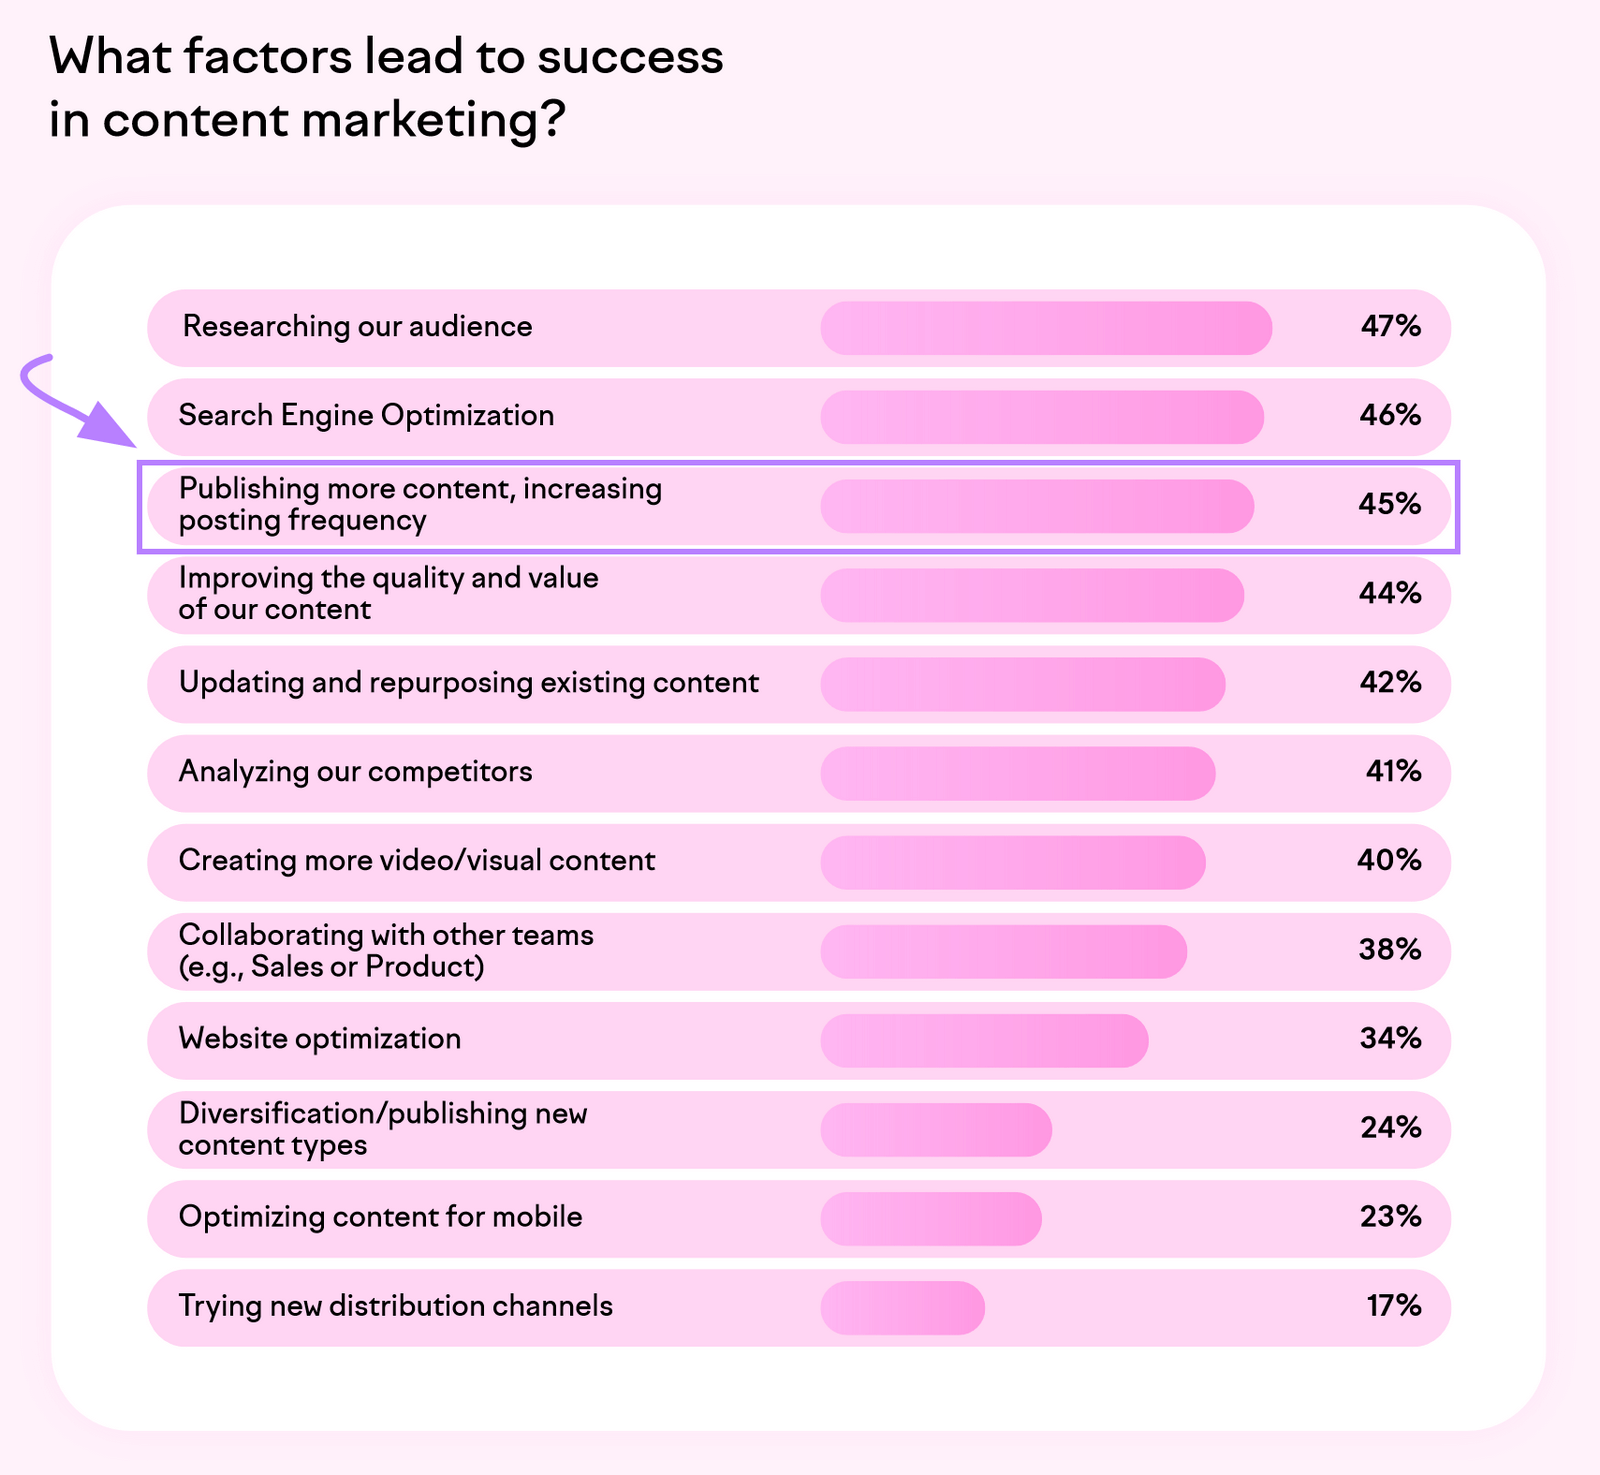 "What factors lead to success in content marketing" question from State of Content Marketing report